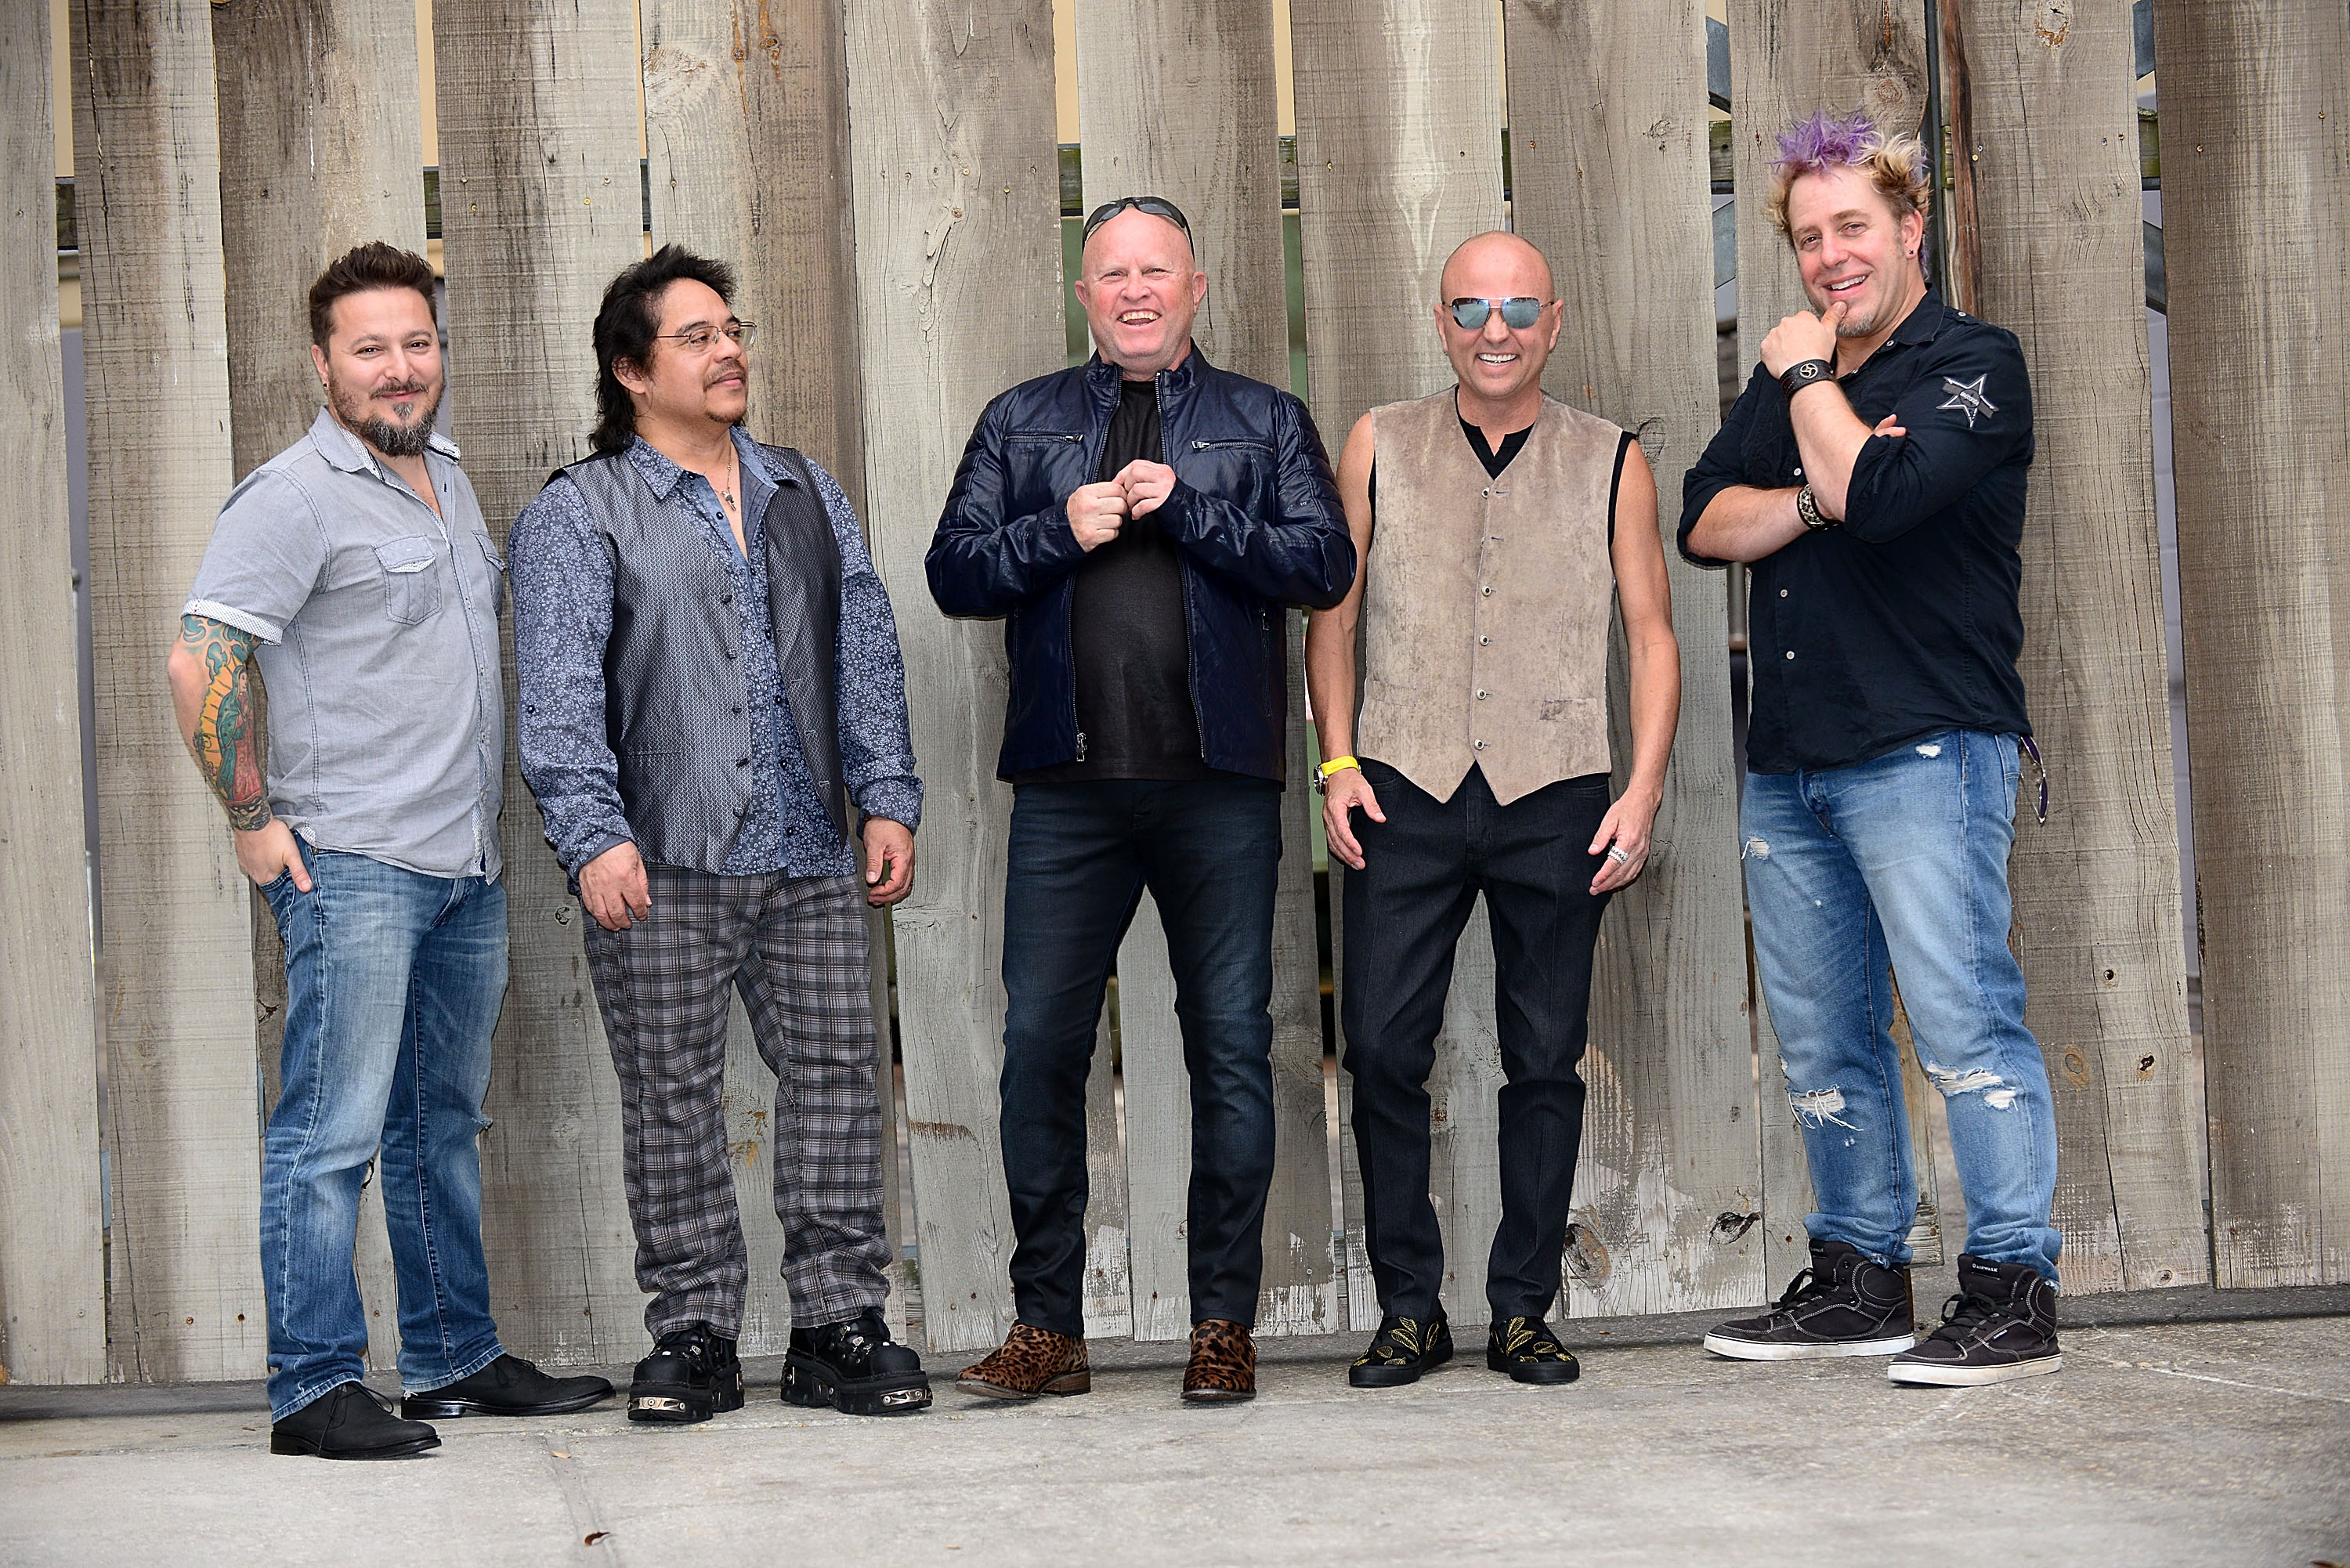 Jimmy D Robinson & Flock of Seagulls at H.O.B. - L to R: Lucio Rubino, Joe Rodriguez, Jimmy D Robinson, Mike Score, Kevin Rankin. (Photo by Gerardo Mora/Getty Images)